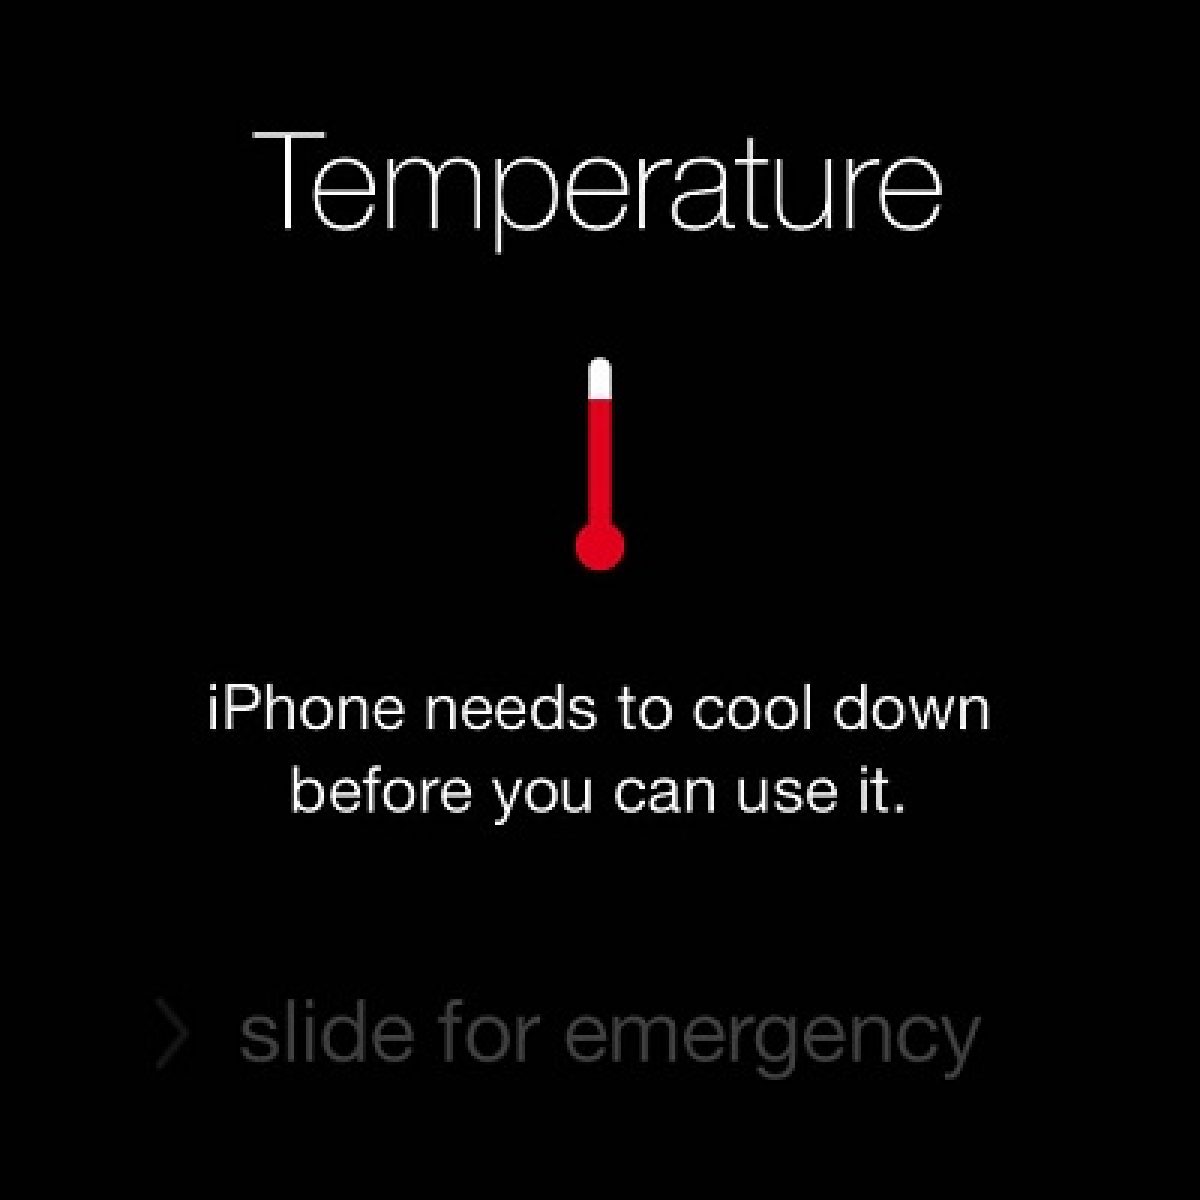 How To Handle Iphone Extreme Temperature Warnings